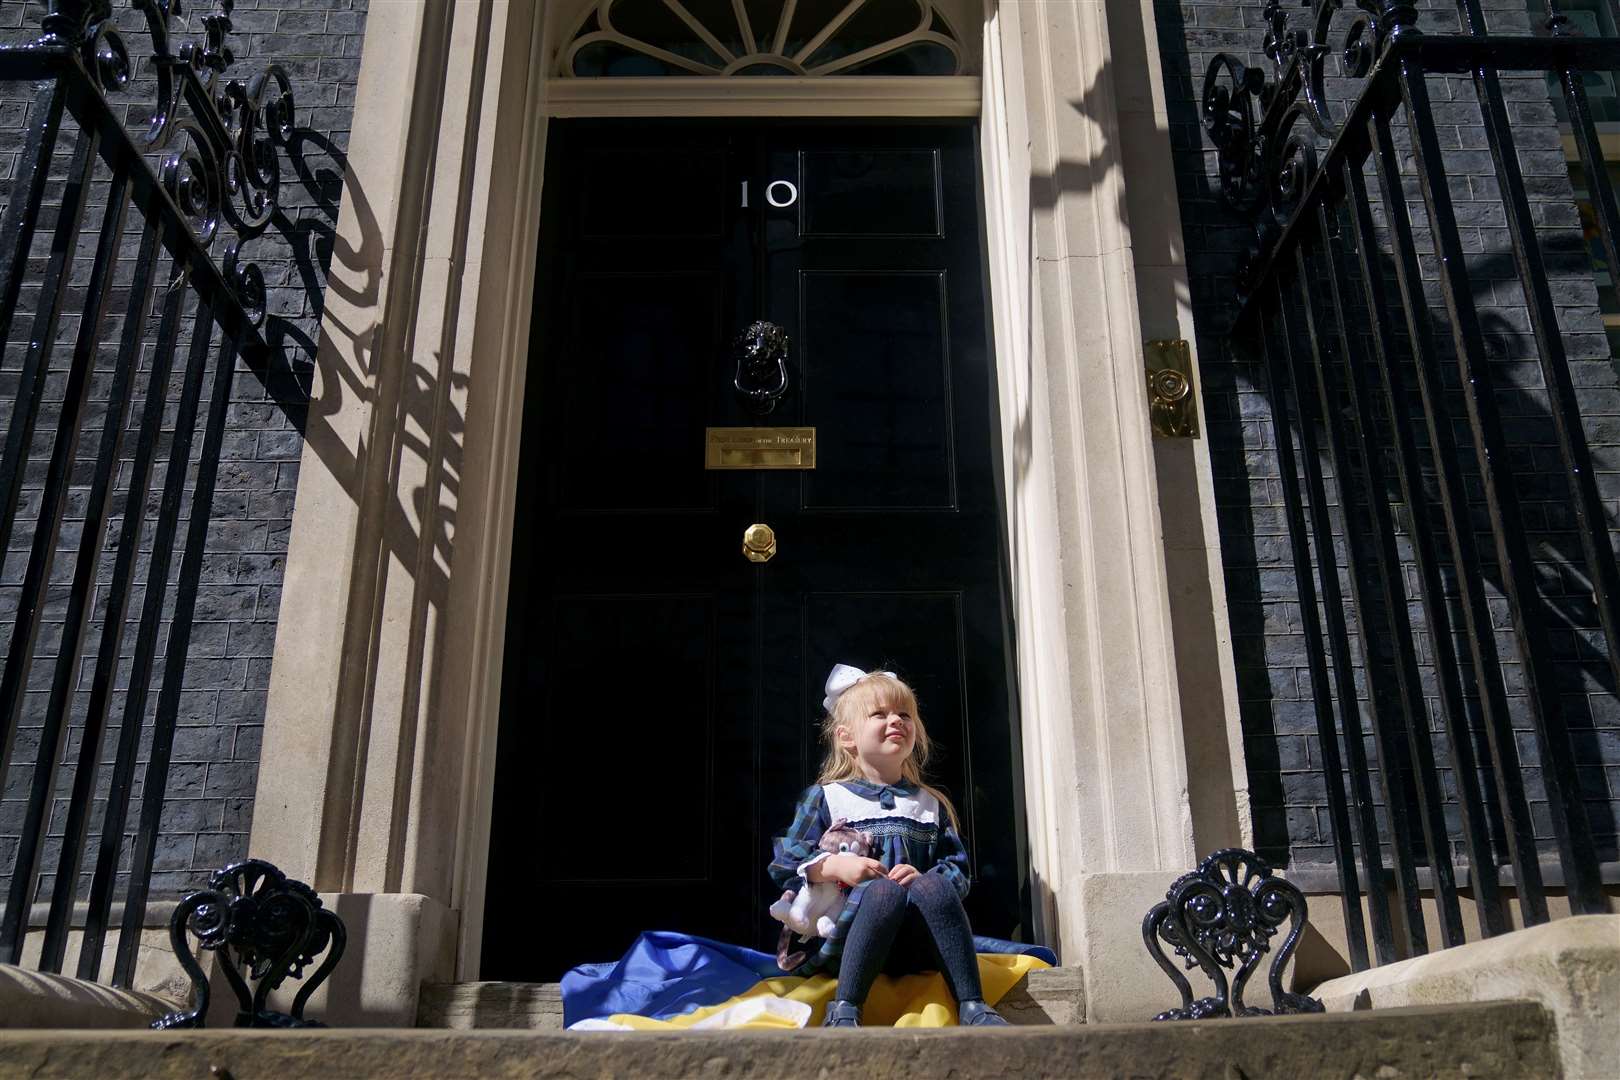 Ukrainian refugee Kira Ryndova, three, holds a Larry the cat soft toy on the steps of 10 Downing Street in May after visiting with her family to meet PM Boris Johnson. They arrived in the UK through the UK visa scheme, following Russia’s invasion in February (Victoria Jones/PA)